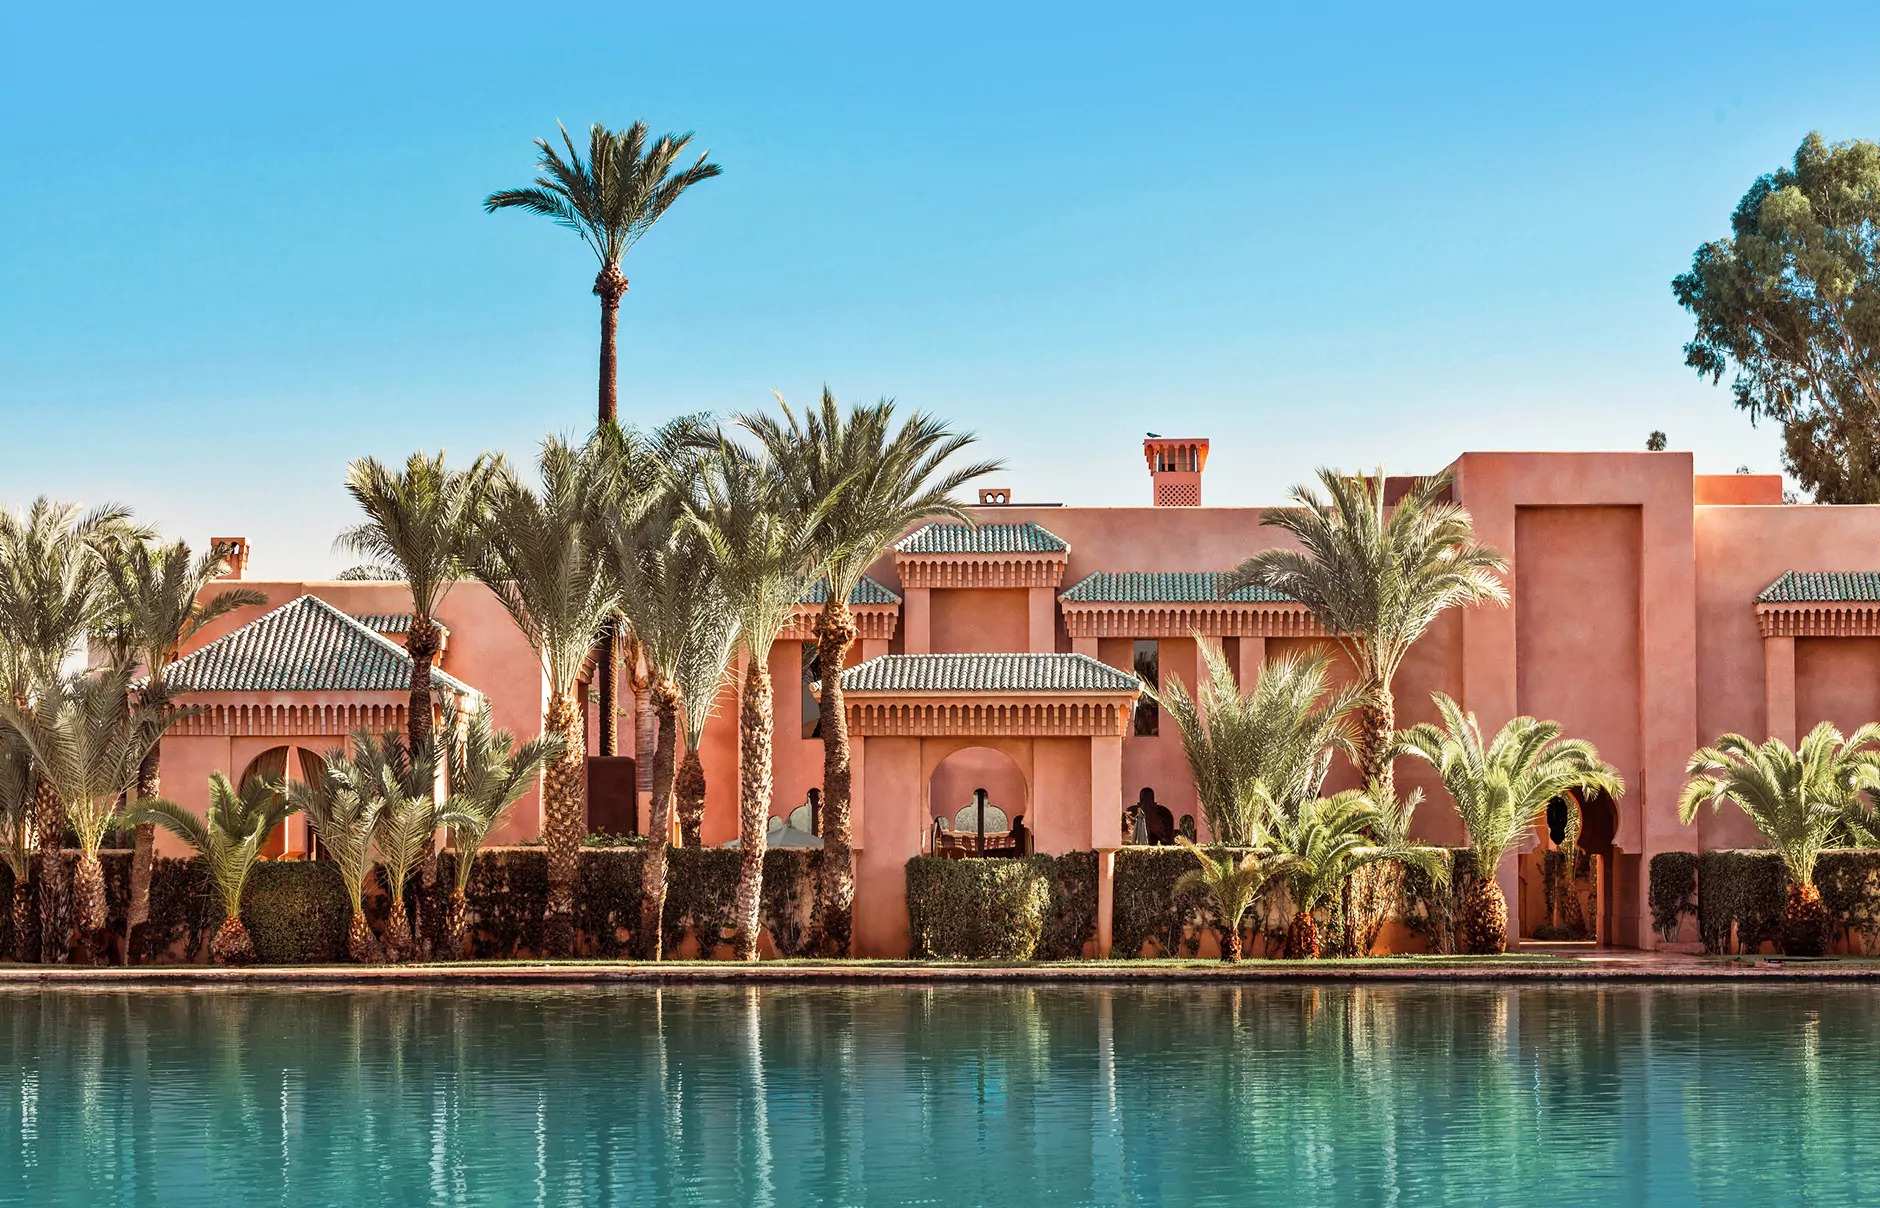 TOP 5 Areas To Stay In Marrakech